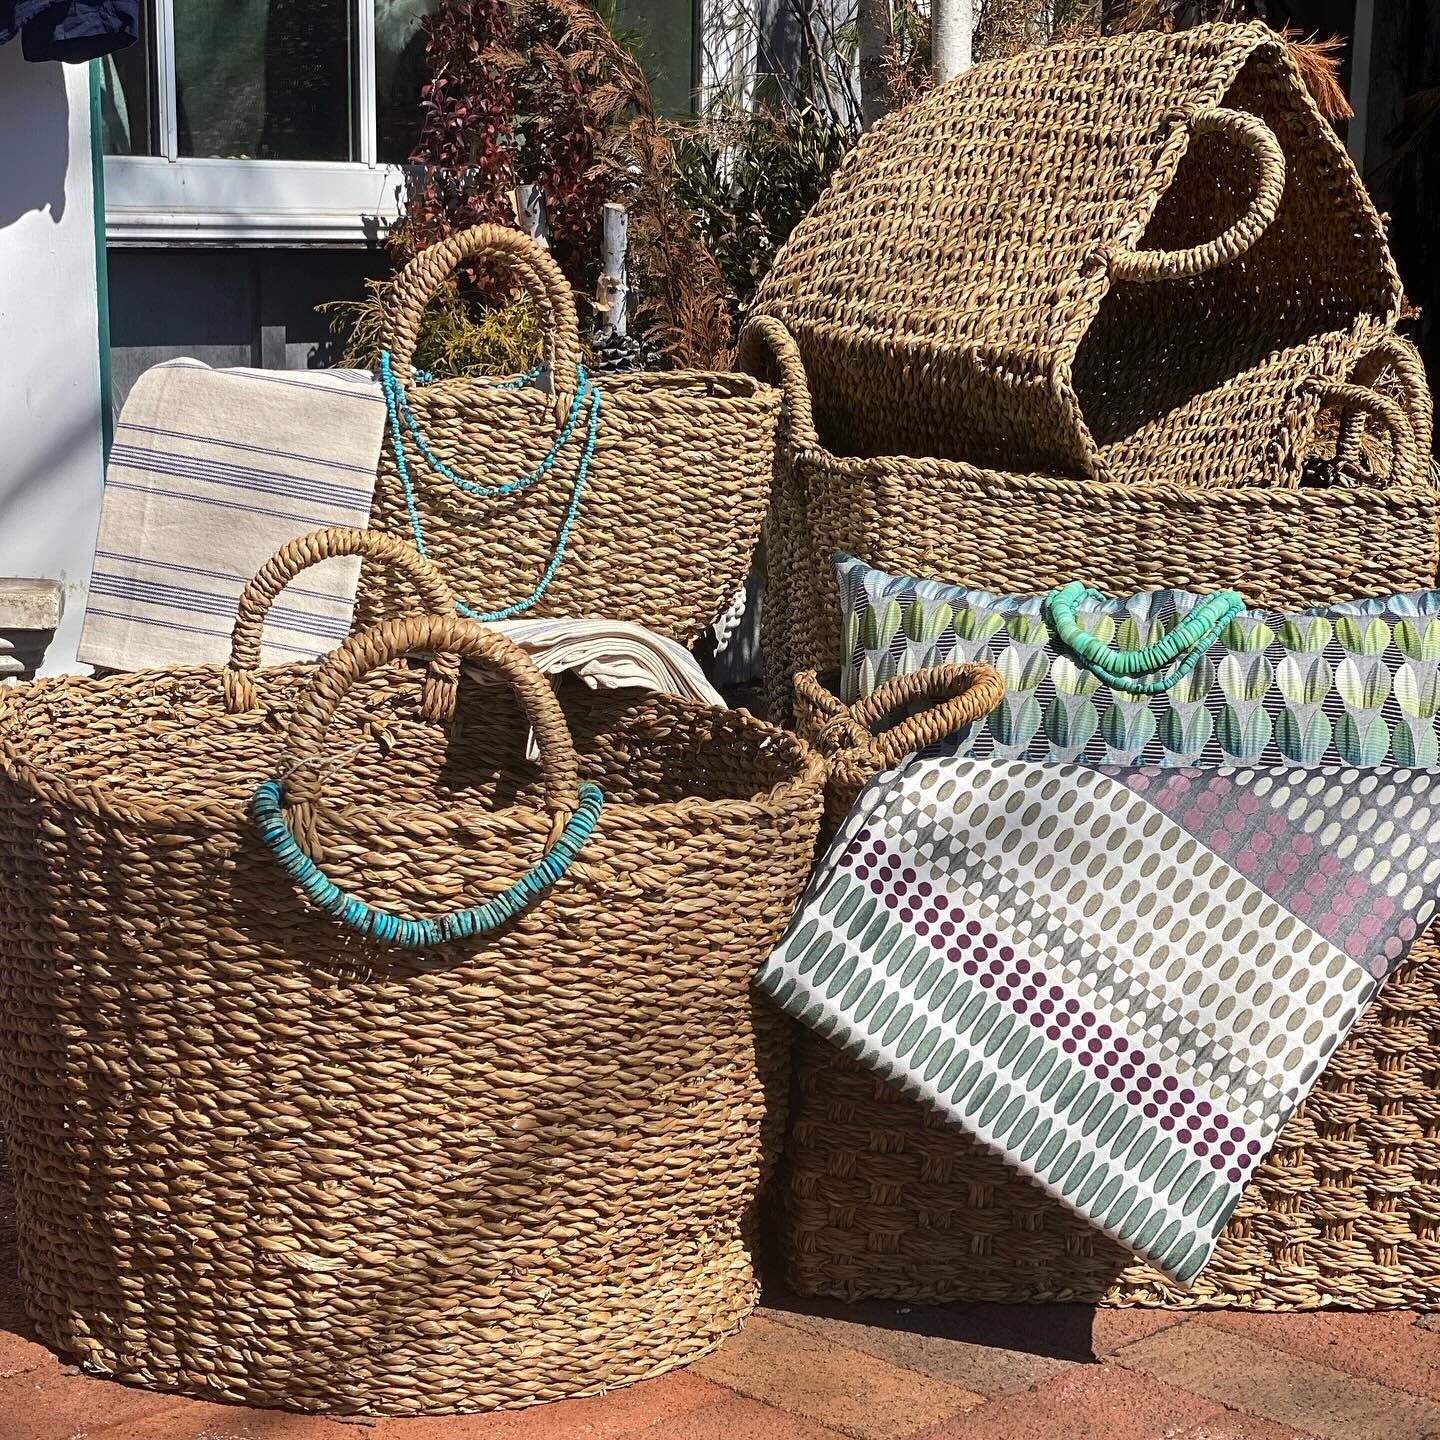 Happy Spring☀️. Time to get organized, switch out winter items and bring some texture in! New collections have arrived in the shop! 

#baskets #organization #spring #handwoven #artisan #africa #naturalgrasses #beautifulstatement #springgoals #smallbu